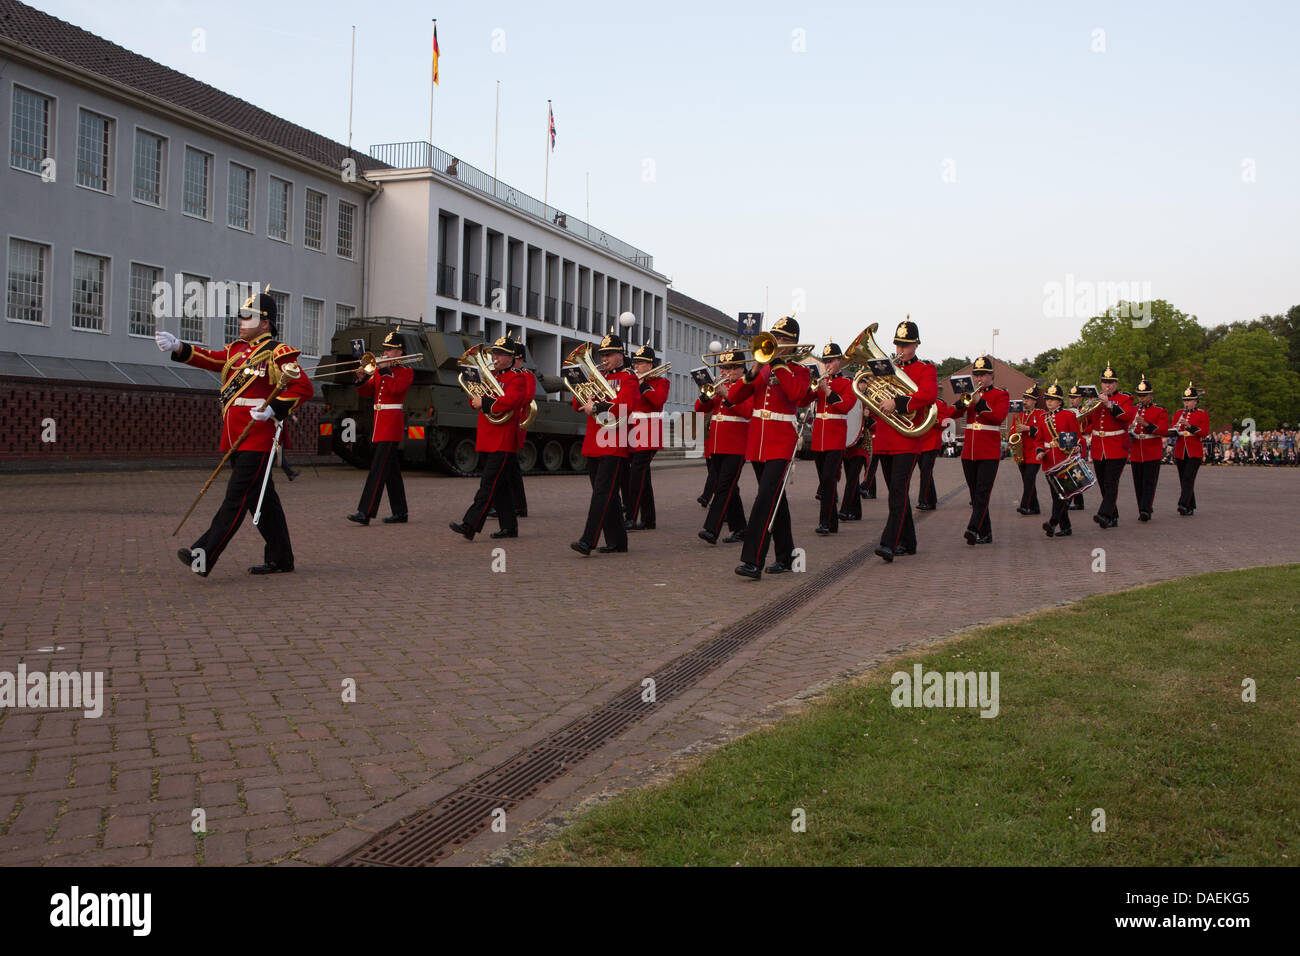 The Band of the Prince of Wales's Division performs in a Beating Retreat ceremony in front of The Big House, Rheindahlen Military Complex, Germany Stock Photo